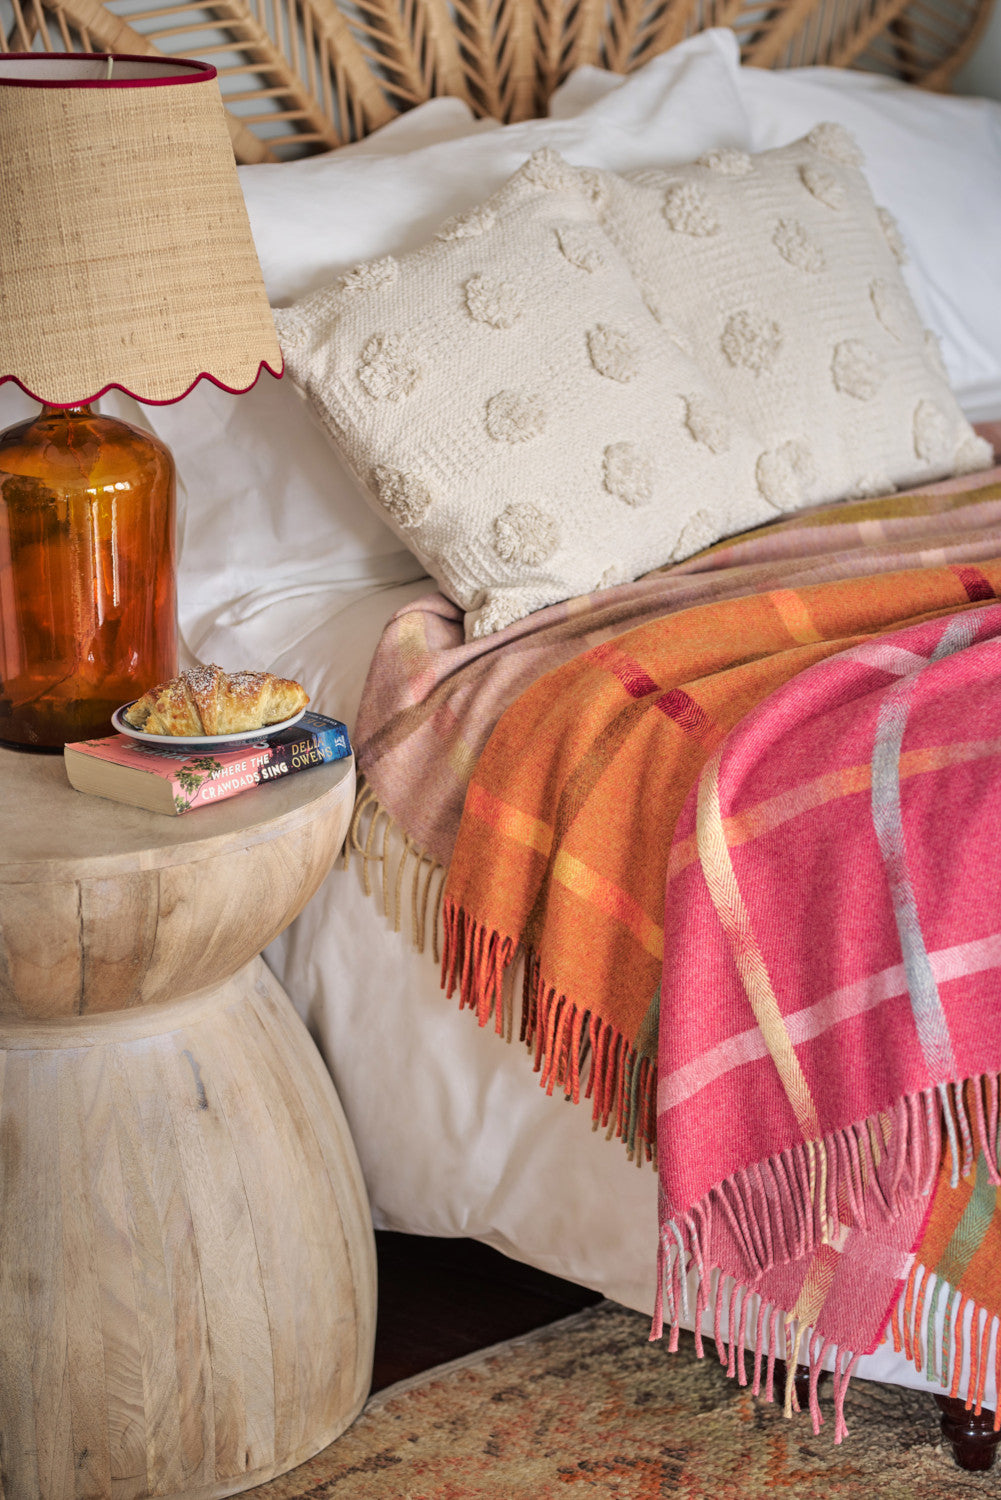 Three Garden Flowers lambswool throws draped over a bed next to a bedside table